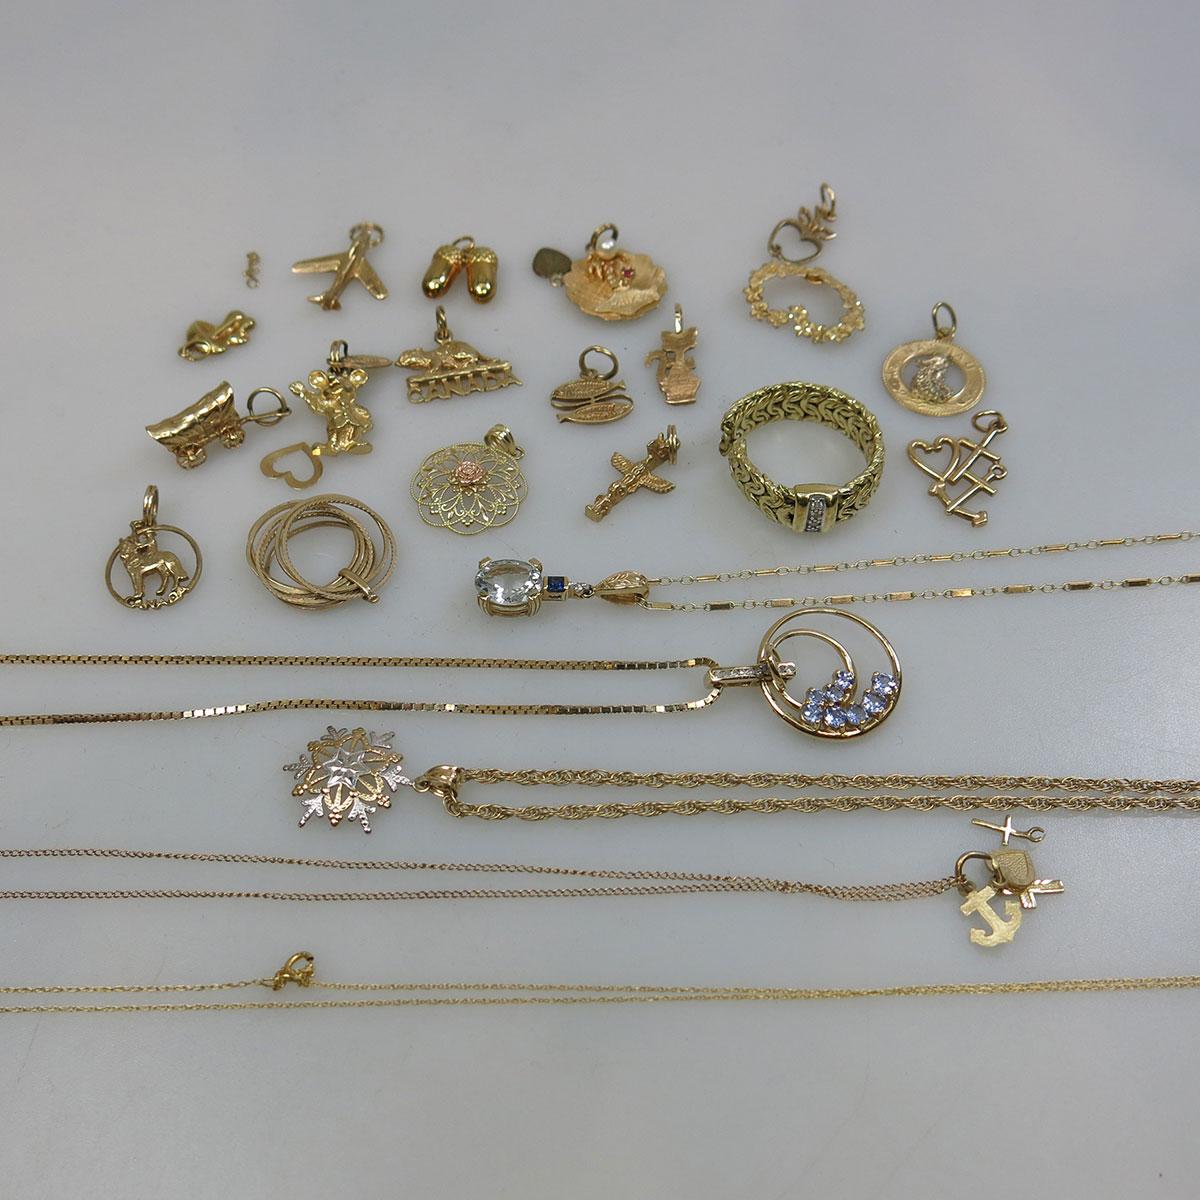 Small Quantity Of Gold Chains, Charms And Pendants